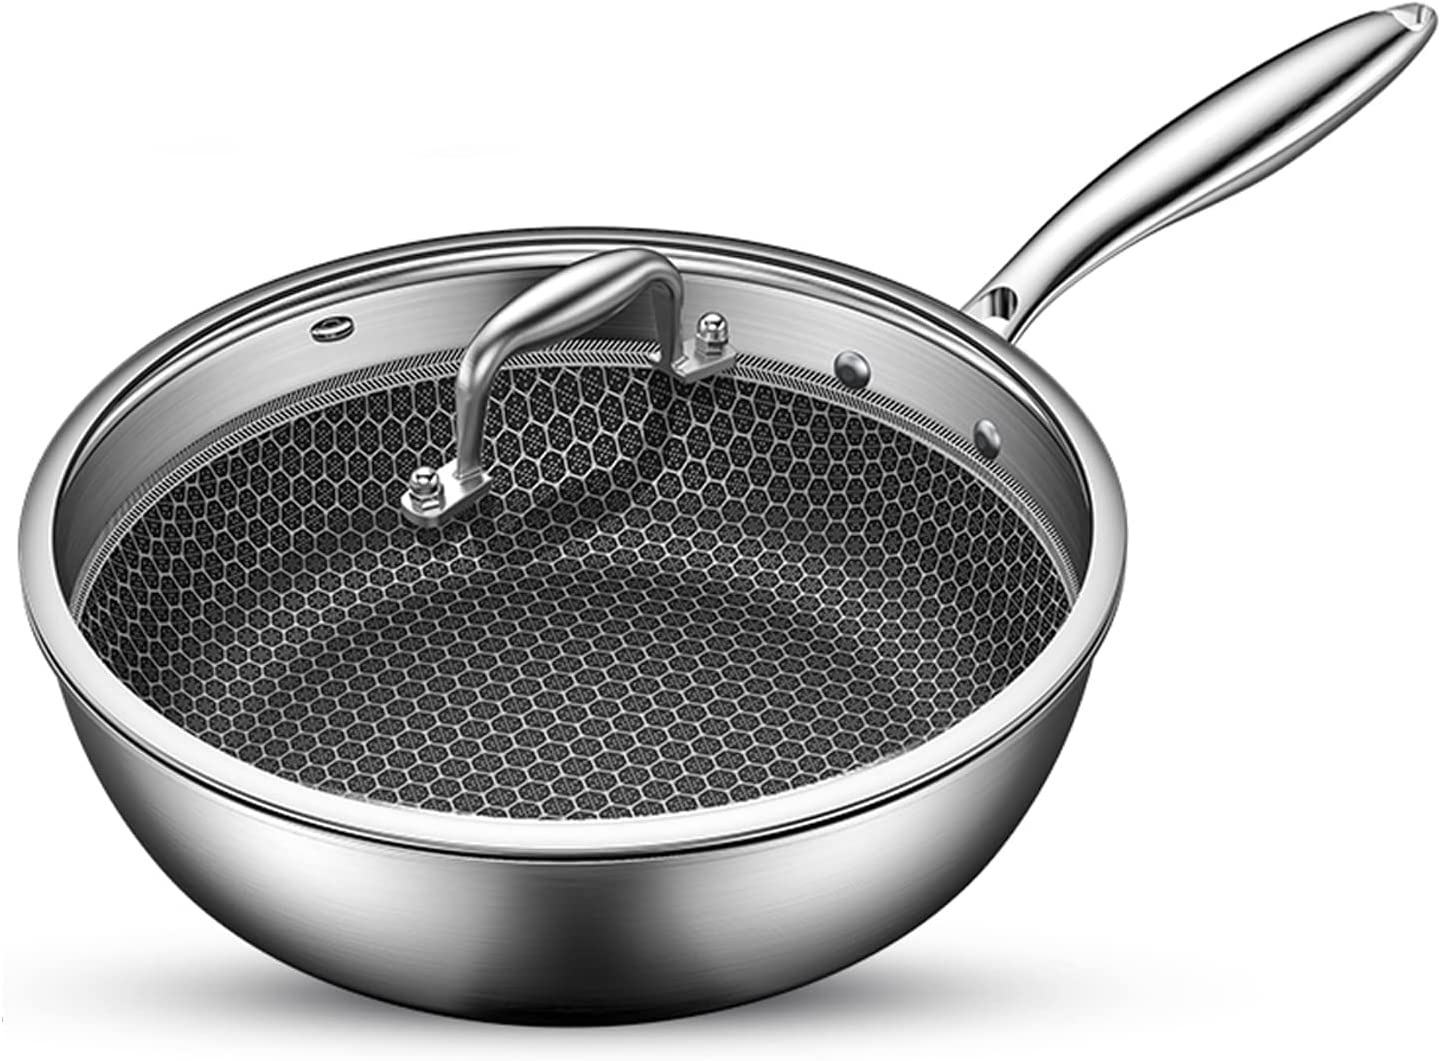 Nonstick Hybrid Stainless Steel Frying Pan 10 Inch [...]